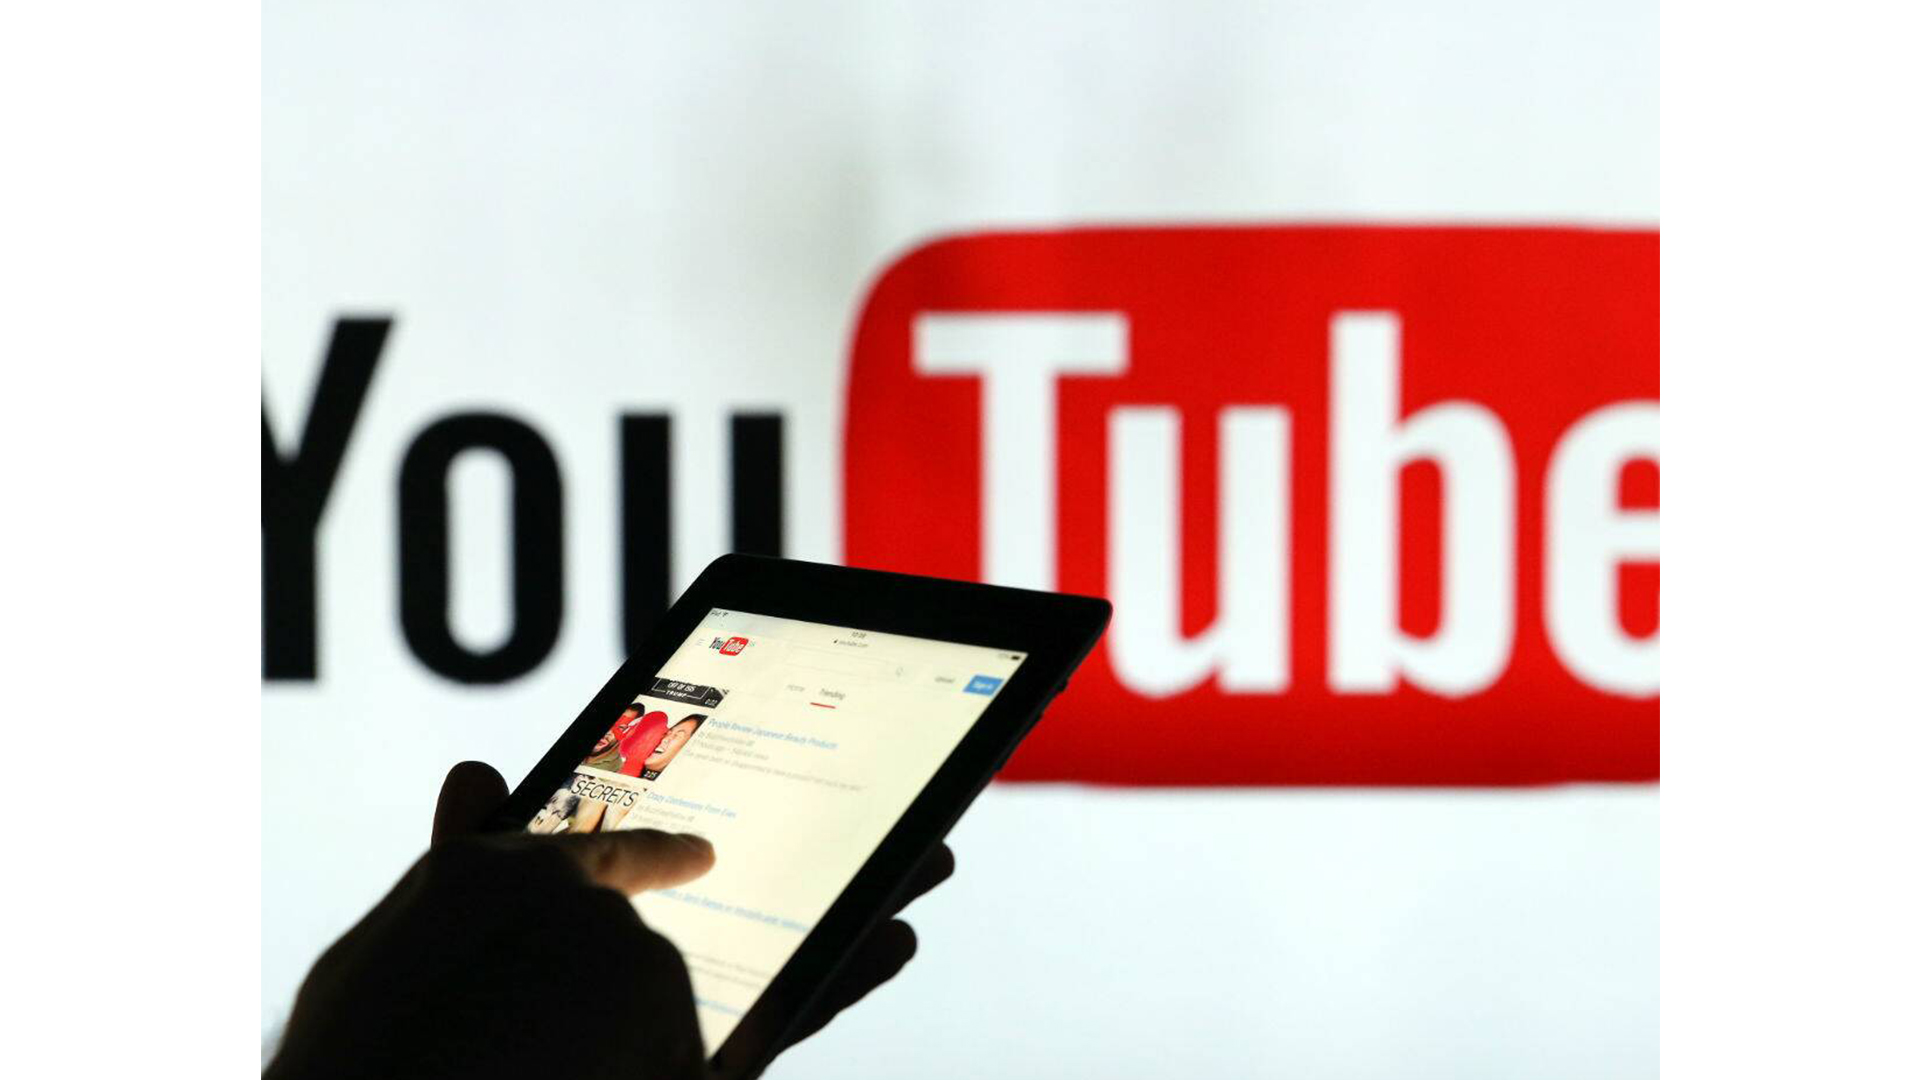 Youtube worldwide outage due to ‘glitch’ - back up again